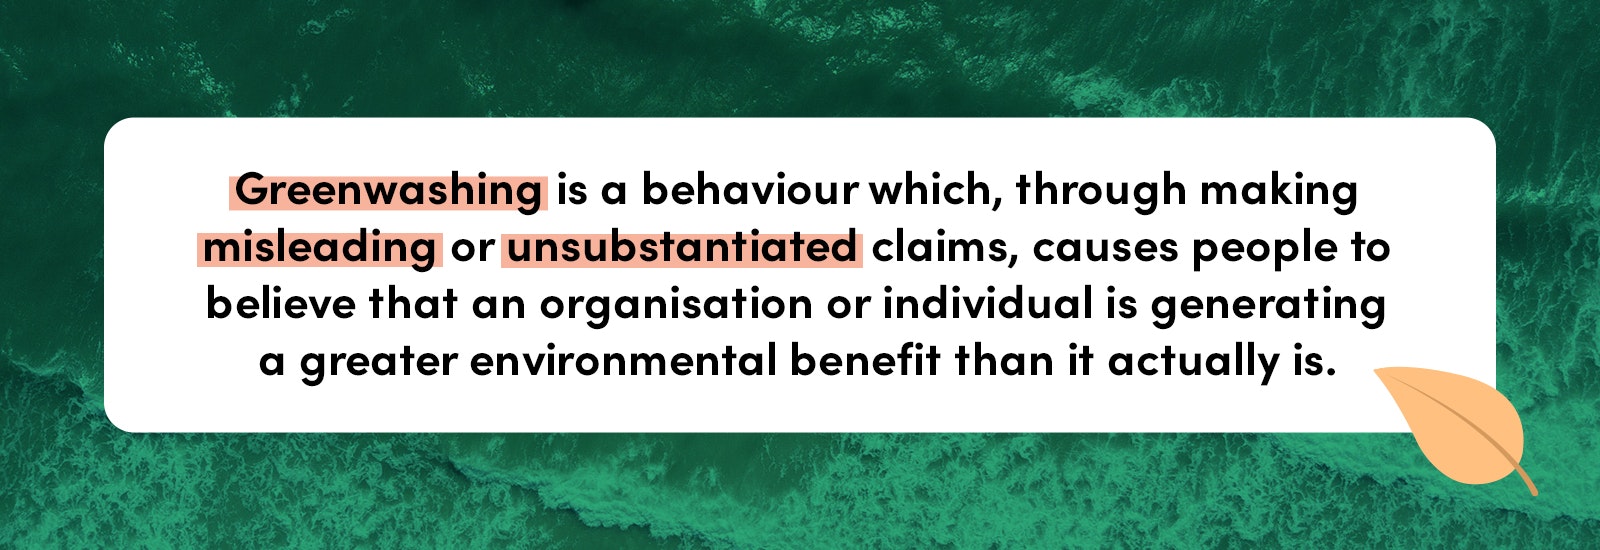 Greenwashing is a behaviour which, through making misleading or unsubstantiated claims, causes people to believe that an organisation or individual is generating a greater environmental benefit than it actually is.